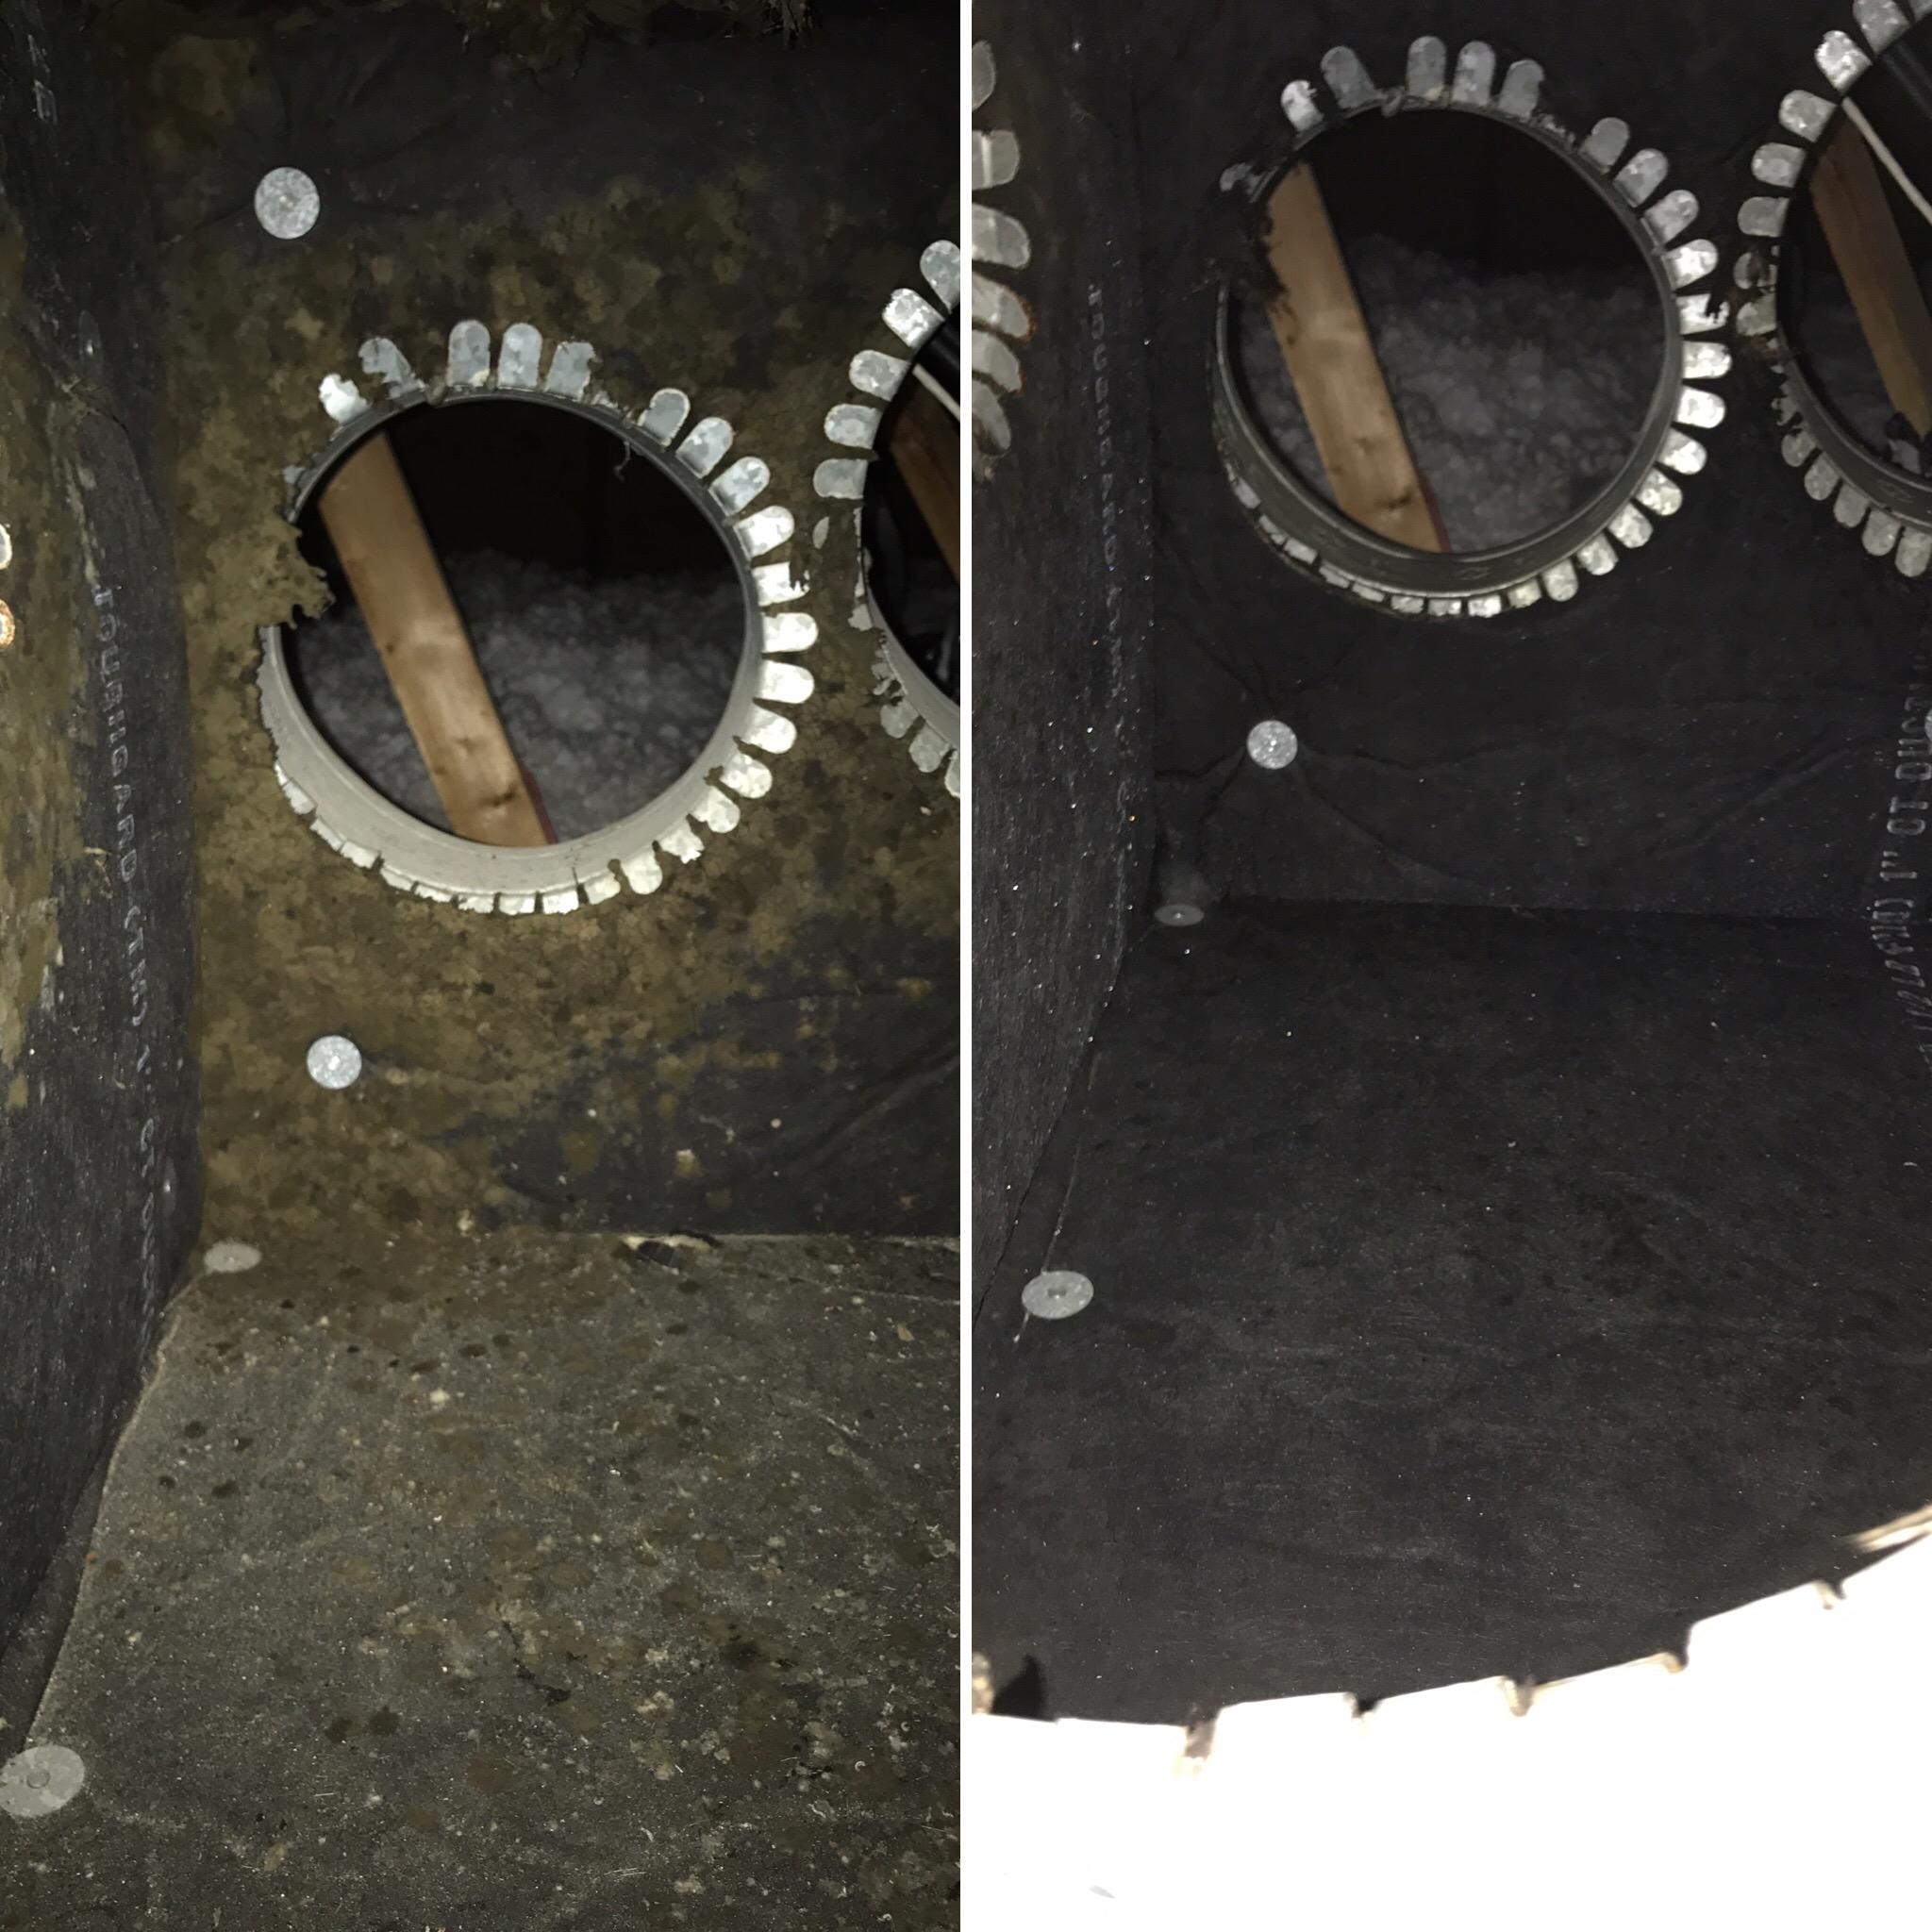 Supply Plenum - before & after